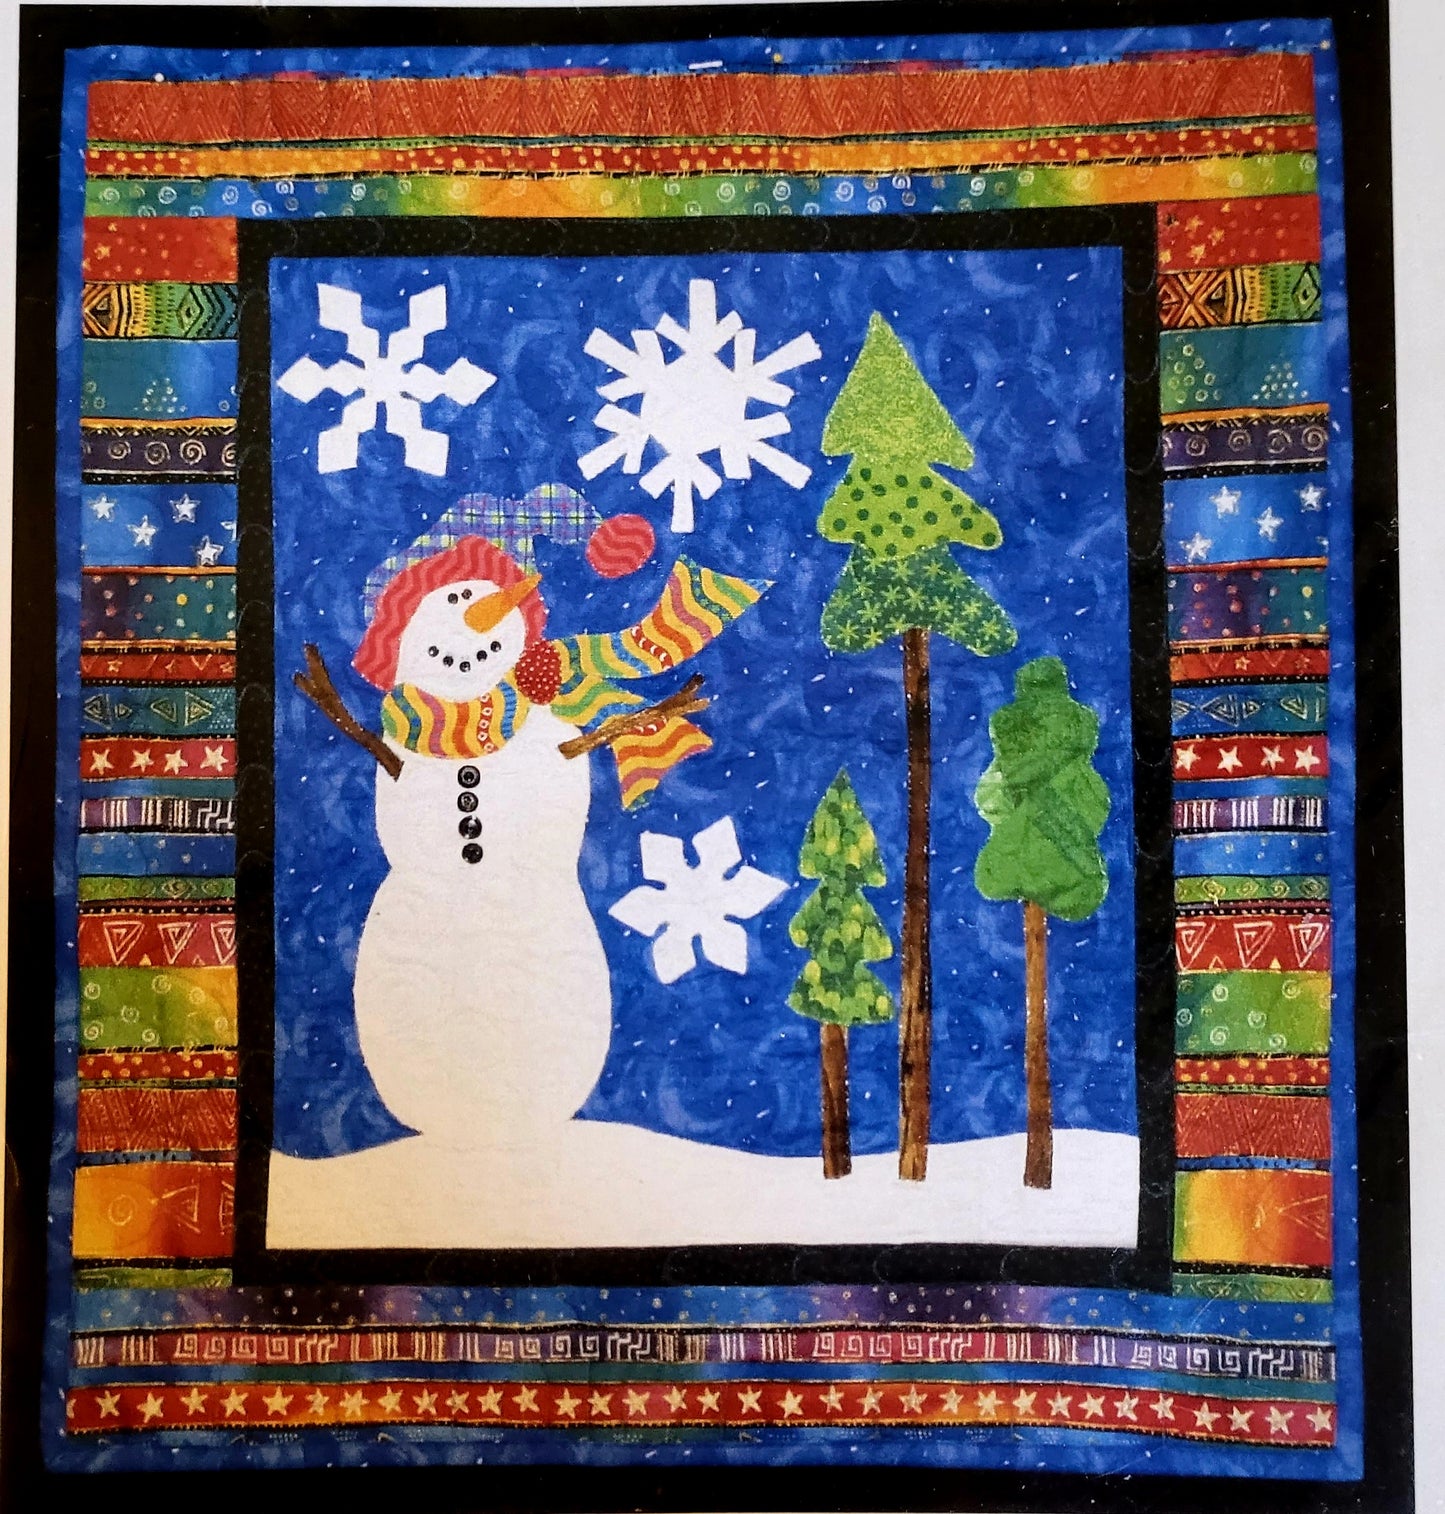 Winter Wonder "Snowman" Quilted Wall Hanging by Sara Tuttle (23" x 26") #QC181